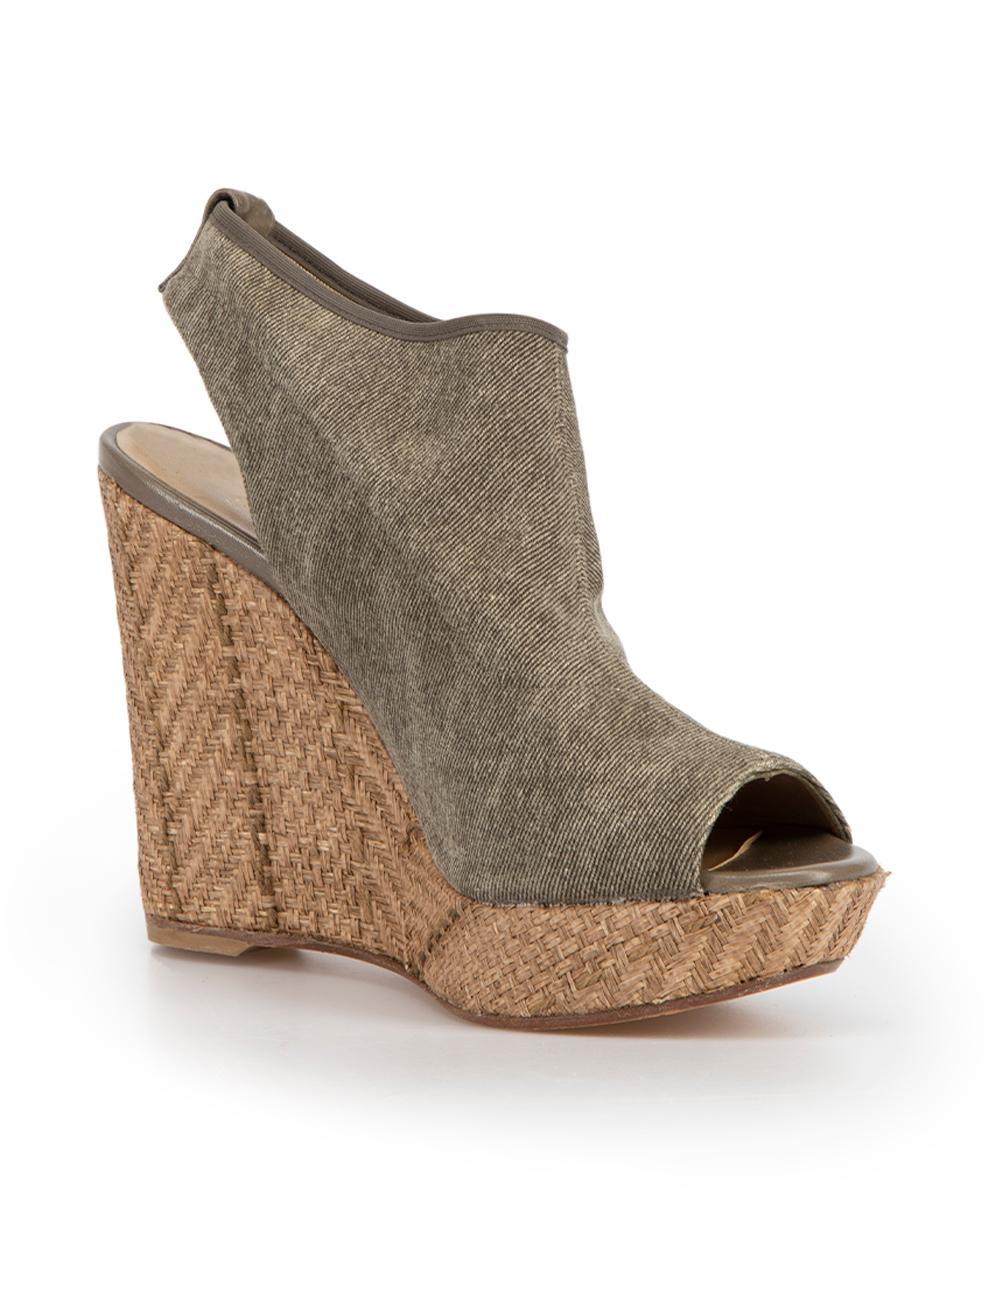 CONDITION is Very good. Hardly any visible wear to shoes is evident on this used Stuart Weitzman designer resale item.



Details


Khaki

Denim

Espadrilles

Peep toe

Wedge weaved heel





Made in Spain 

 

Composition

EXTERIOR: